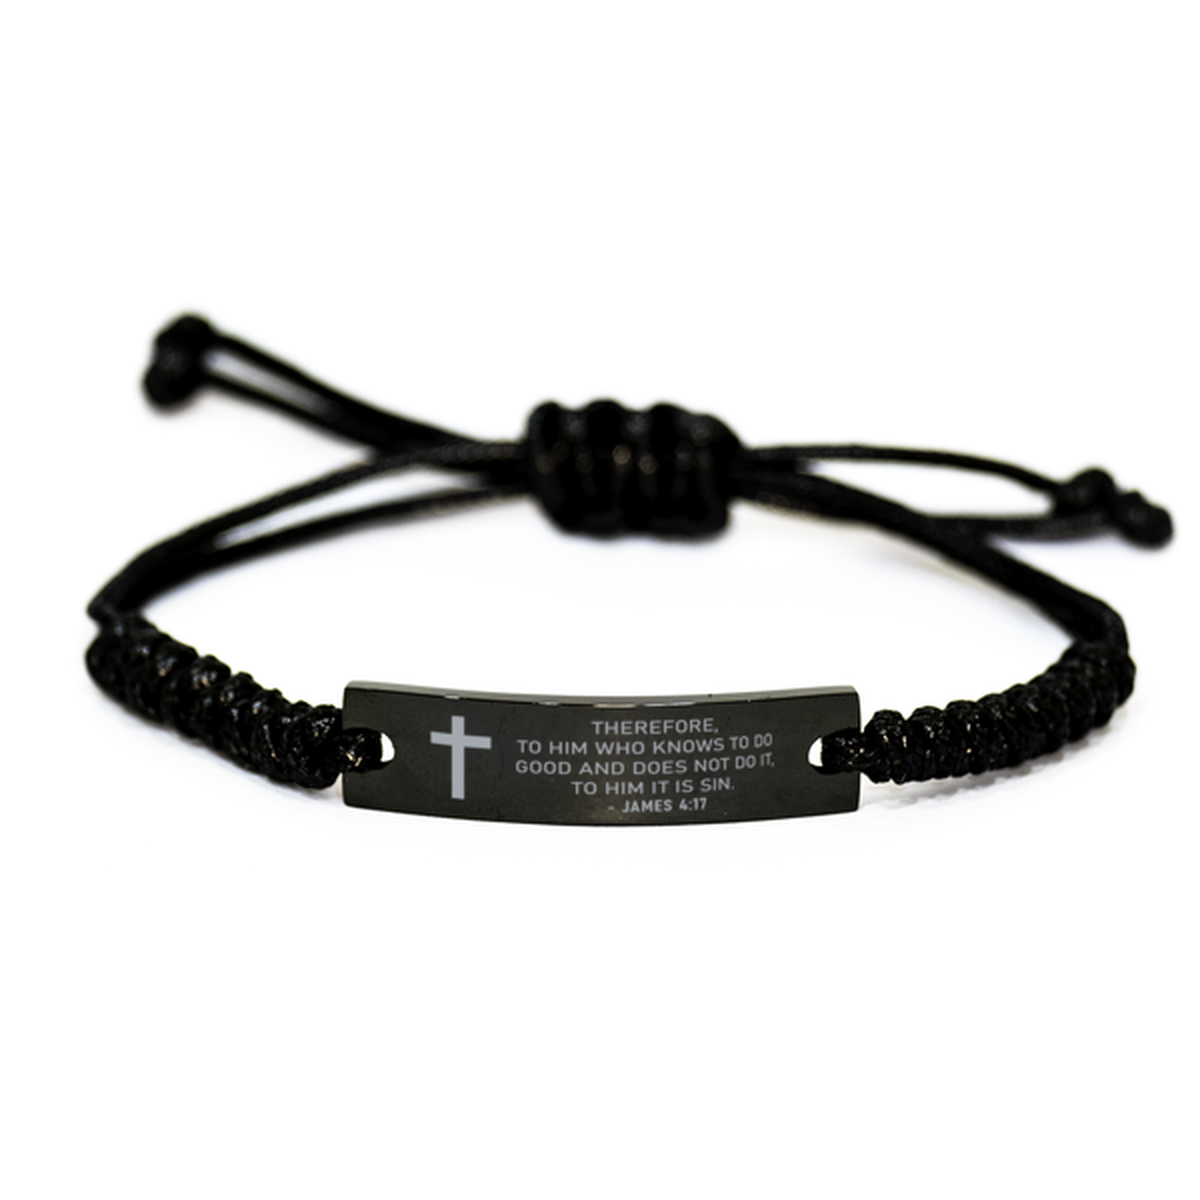 Bible Verse Rope Bracelet, James 4:17 Therefore, To Him Who Knows To Do Good And Does, Christian Encouraging Gifts For Men Women Boys Girls